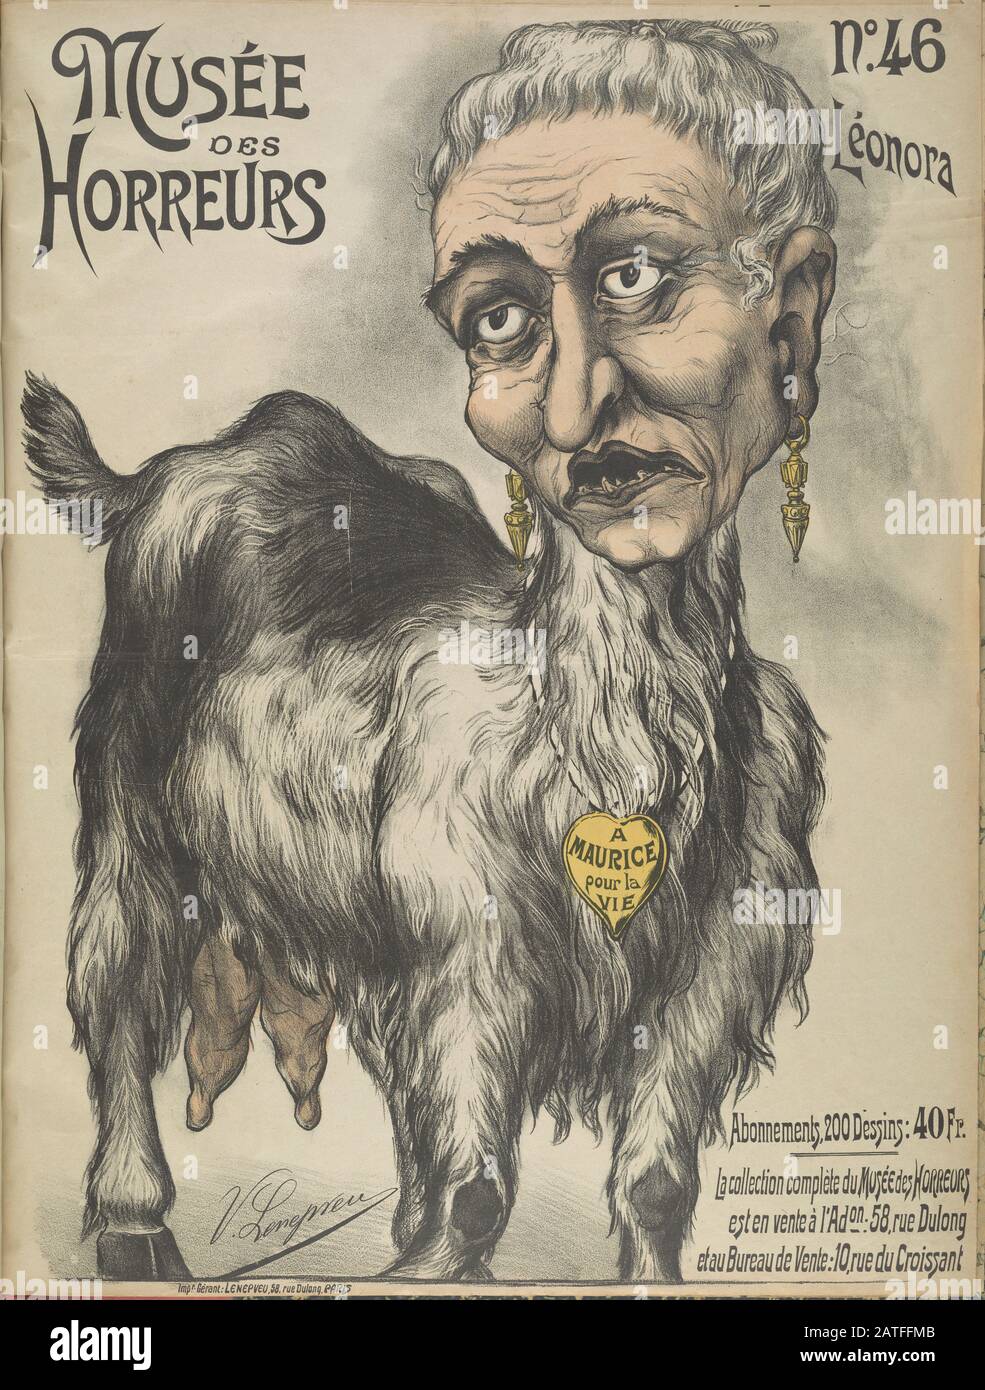 Musée des Horreurs -  No. 46 Léonora  -  1900  -  Lenepveu, V.  -  Caricature of Leonora Laure Rothschild (1837-1911) as an old goat with a locket around her neck. Leonora was the wife and cousin of Alphonse de Rothschild--all members of the prominent Rothschild family of Jewish financiers that became easy targets for anti-semitic outrage during the Dreyfus Affair even though they had little or no direct involvement. Hand colored. Stock Photo